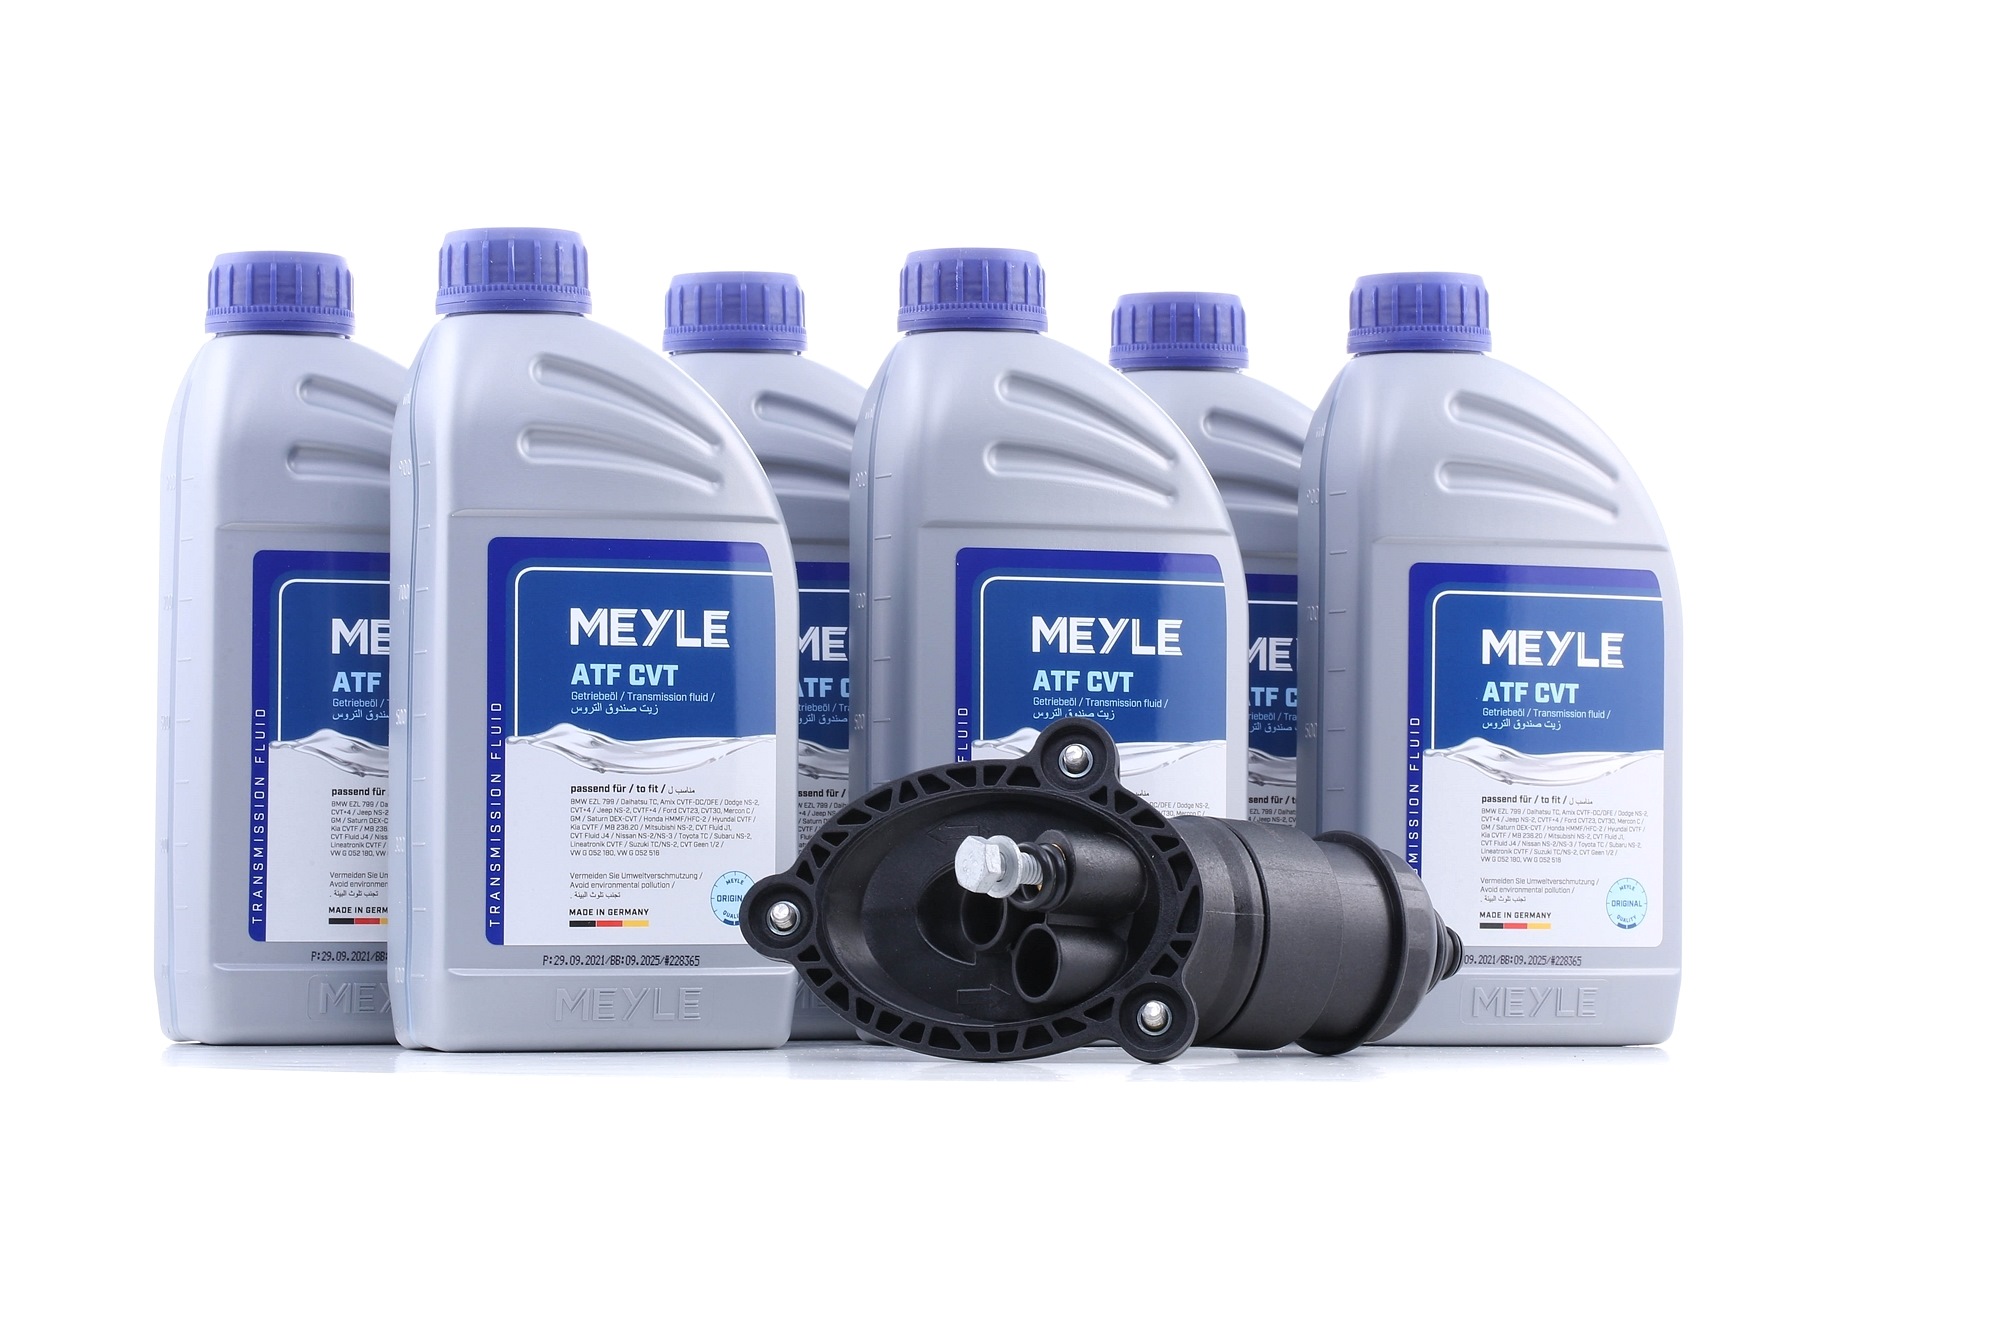 MOK0085 MEYLE with attachment material, with gaskets/seals, with oil quantity for standard oil change Transmission service kit 100 135 0109 buy